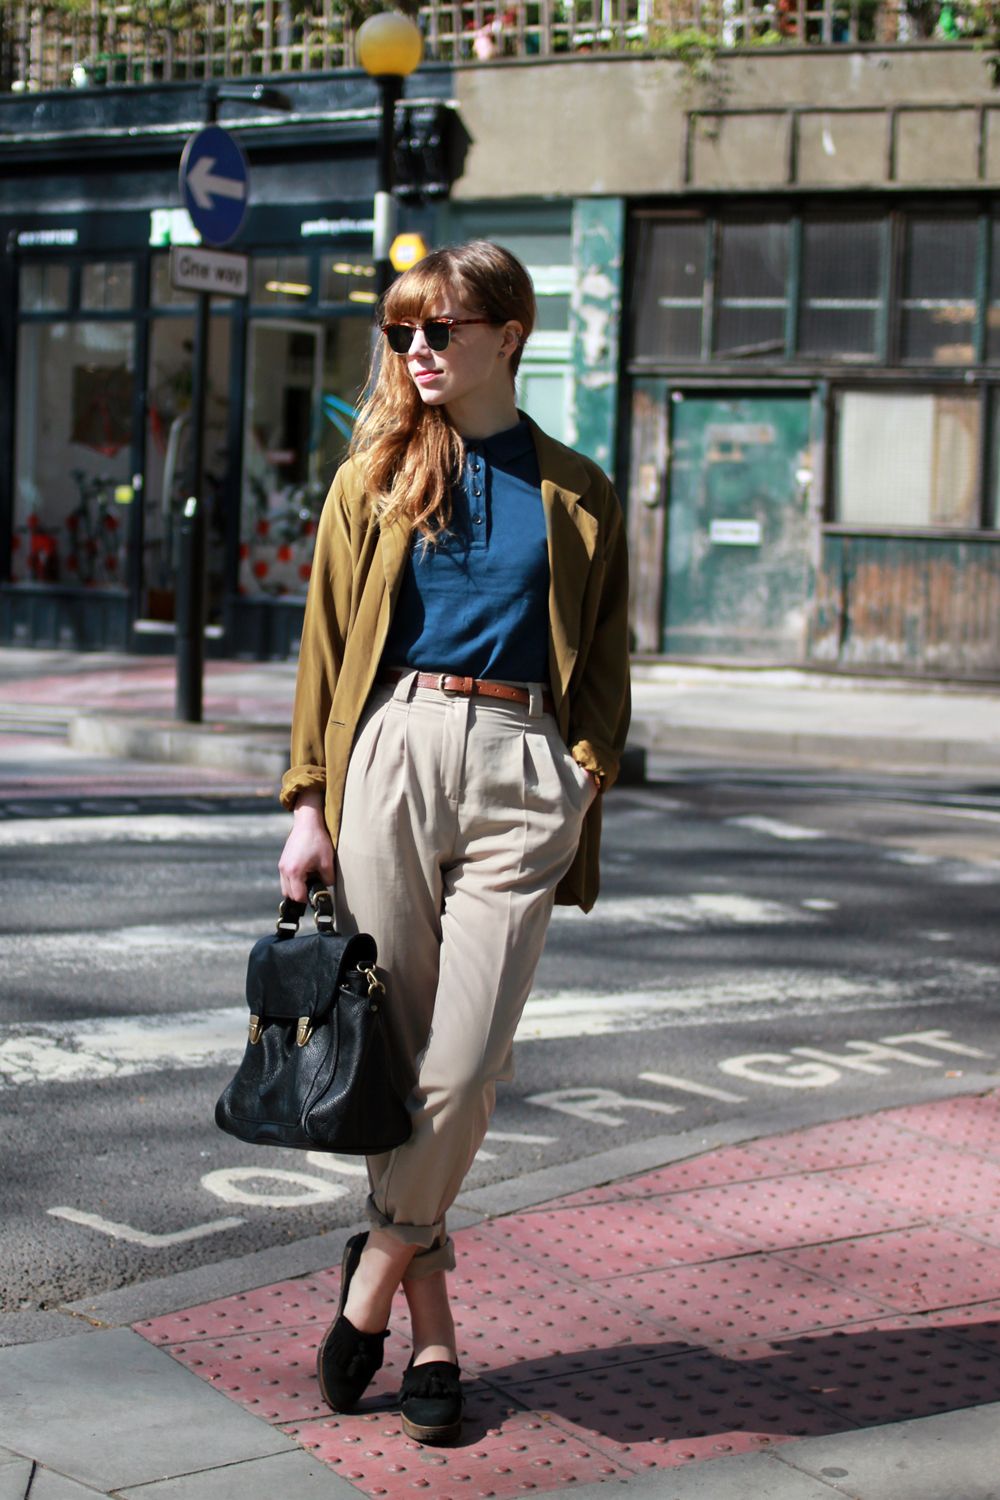 Everyday london fashion trends 38